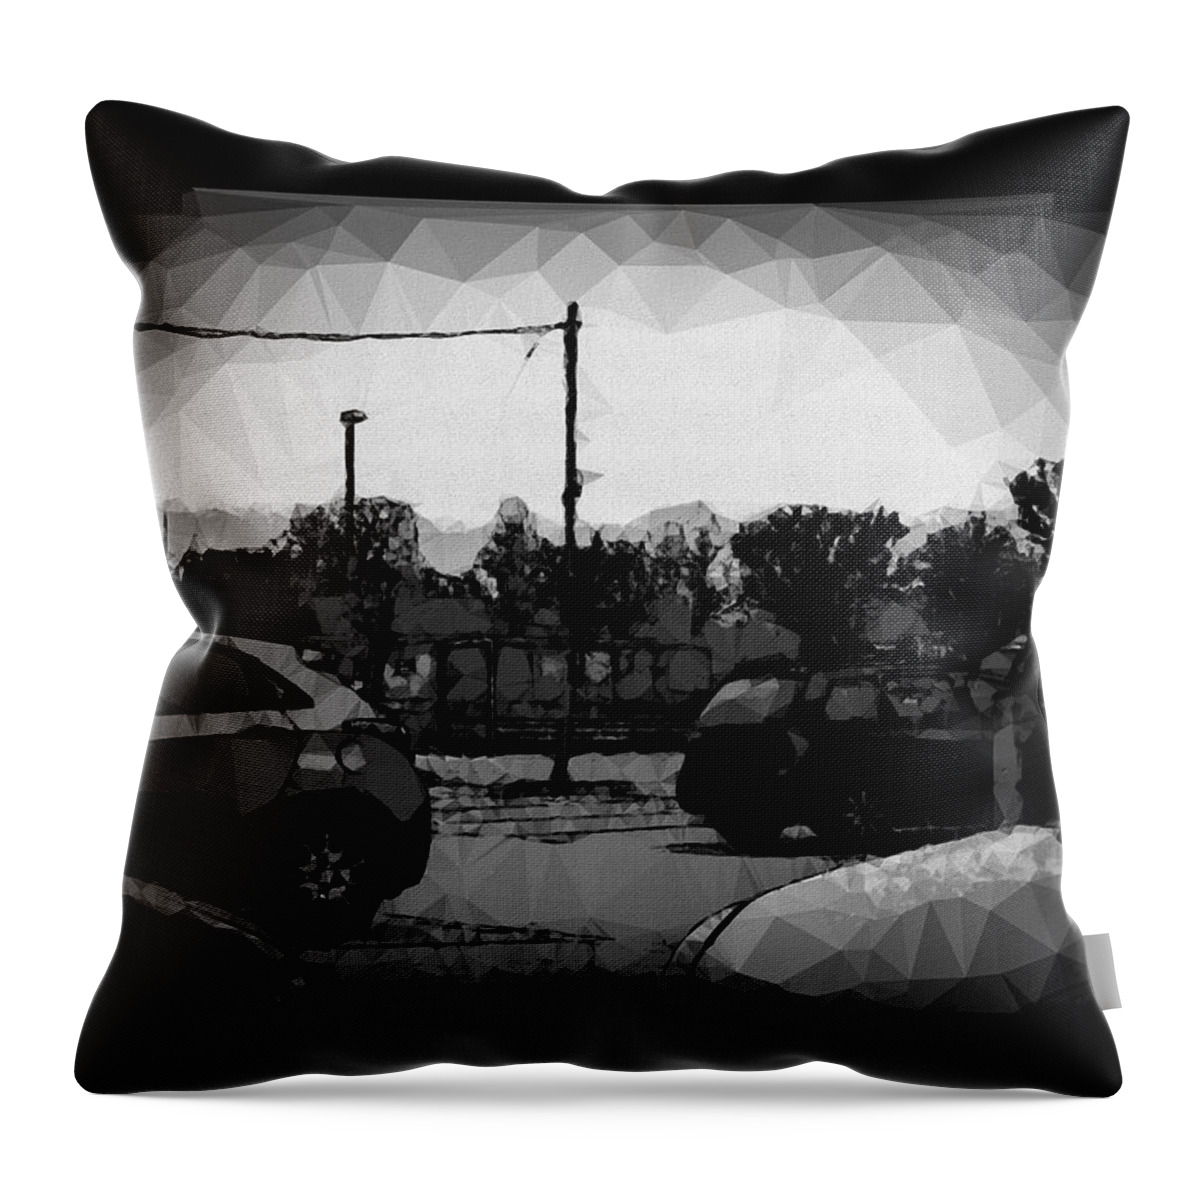 Parking Throw Pillow featuring the photograph Parking by Mimulux Patricia No